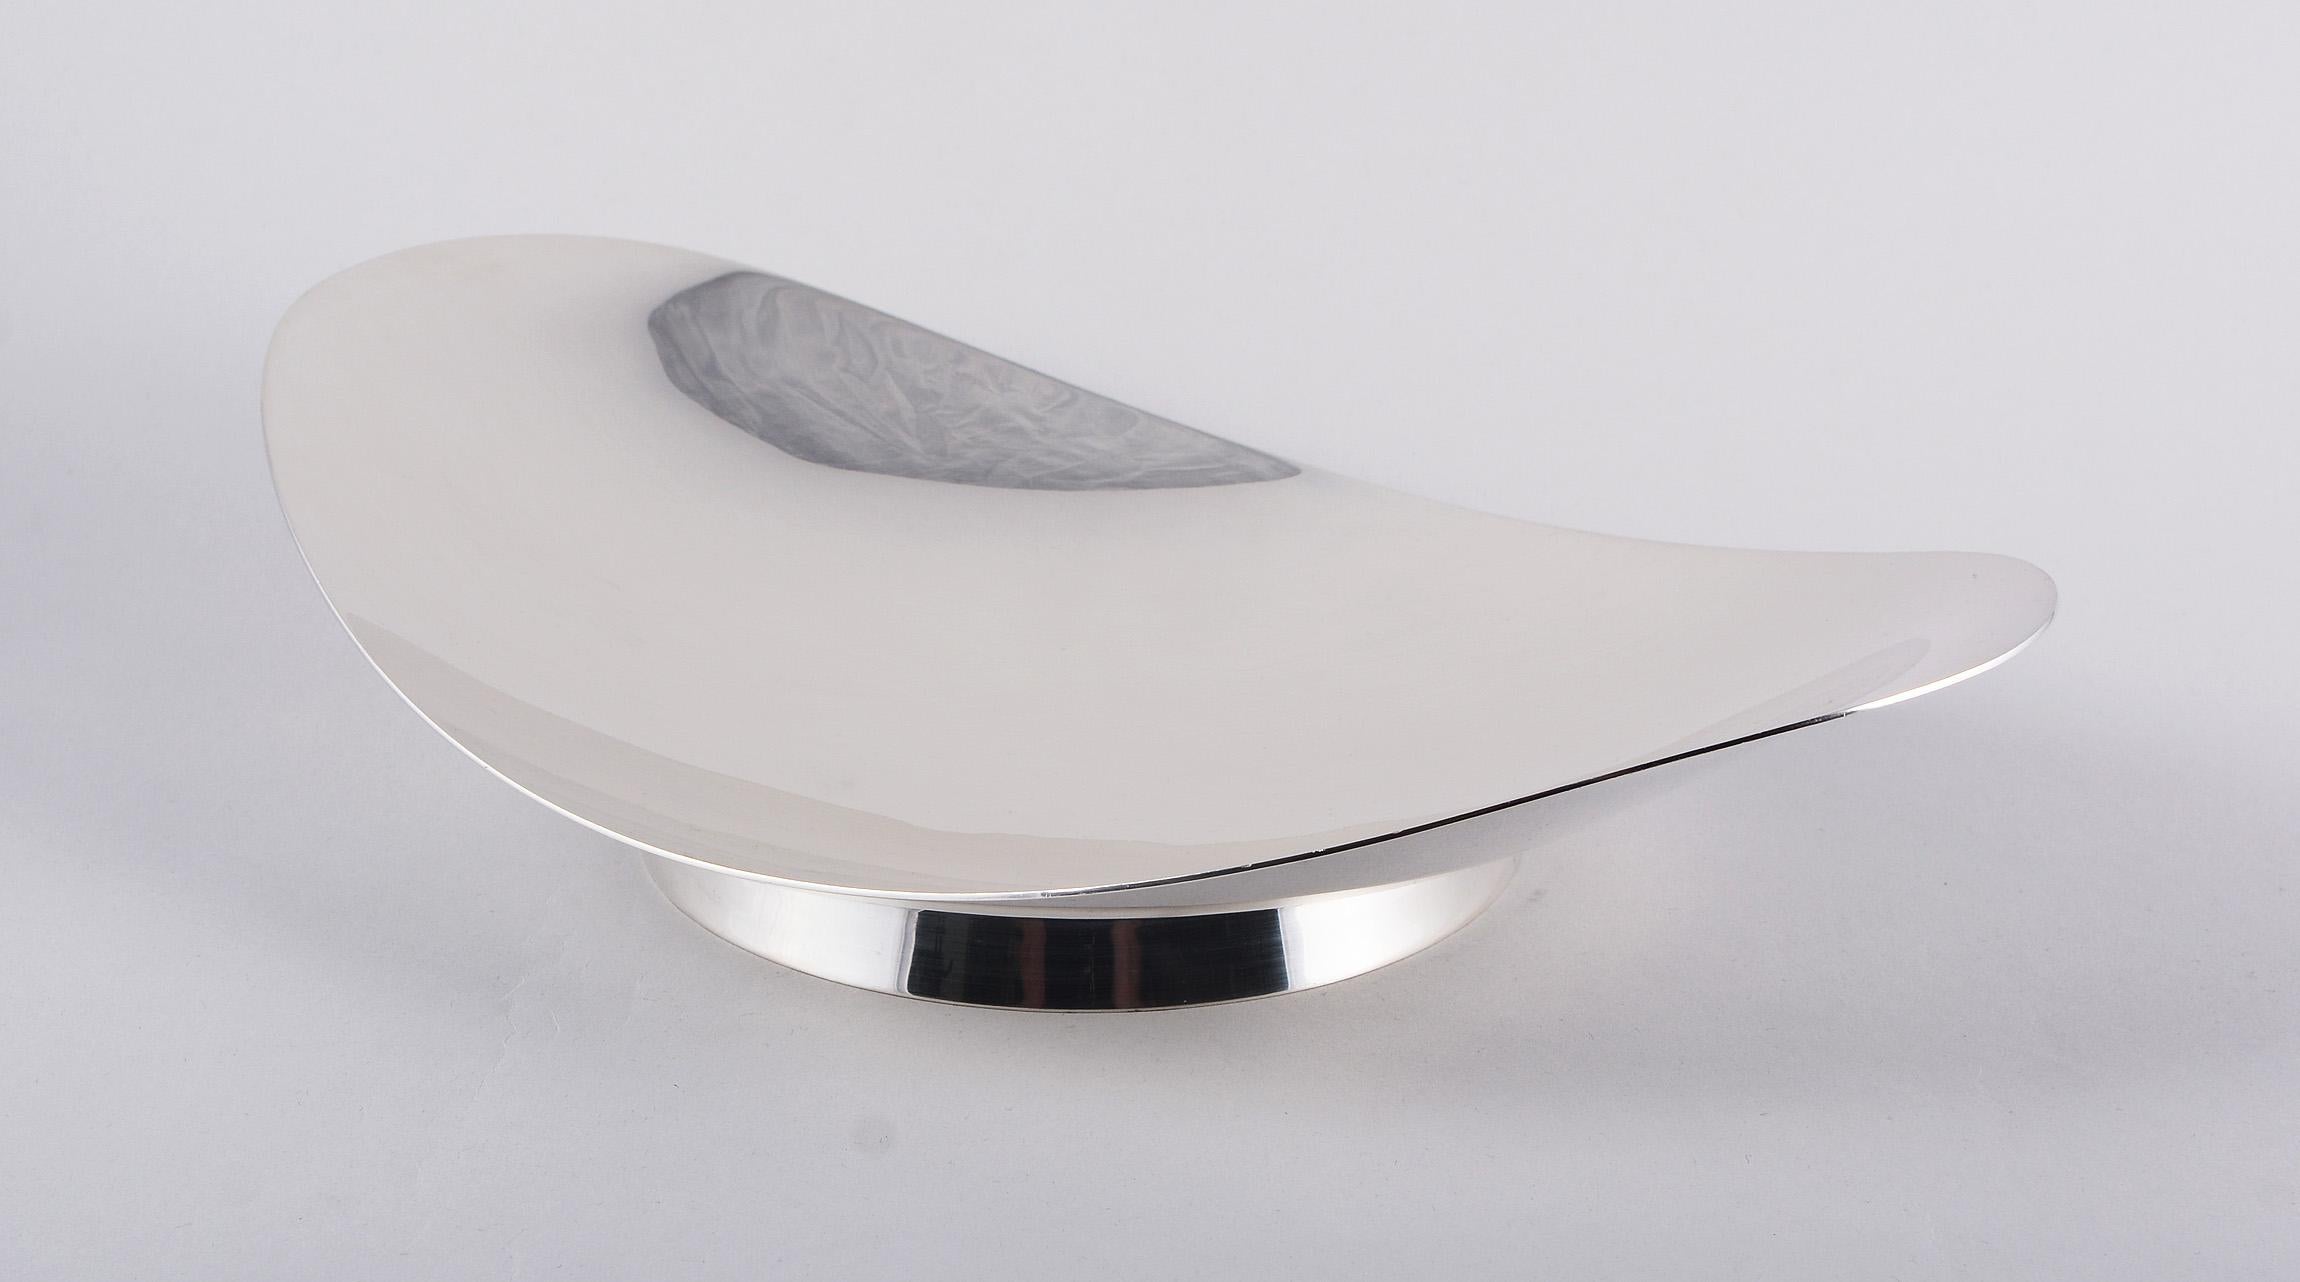 Modernist center bowl in sterling silver by Tiffany. This has a shallow oval form on circular foot. The bowl is marked Tiffany & Co. Makers sterling silver 22416. This bowl dates to the 1940s to the mid-1950s. The bowl weighs approximately 730